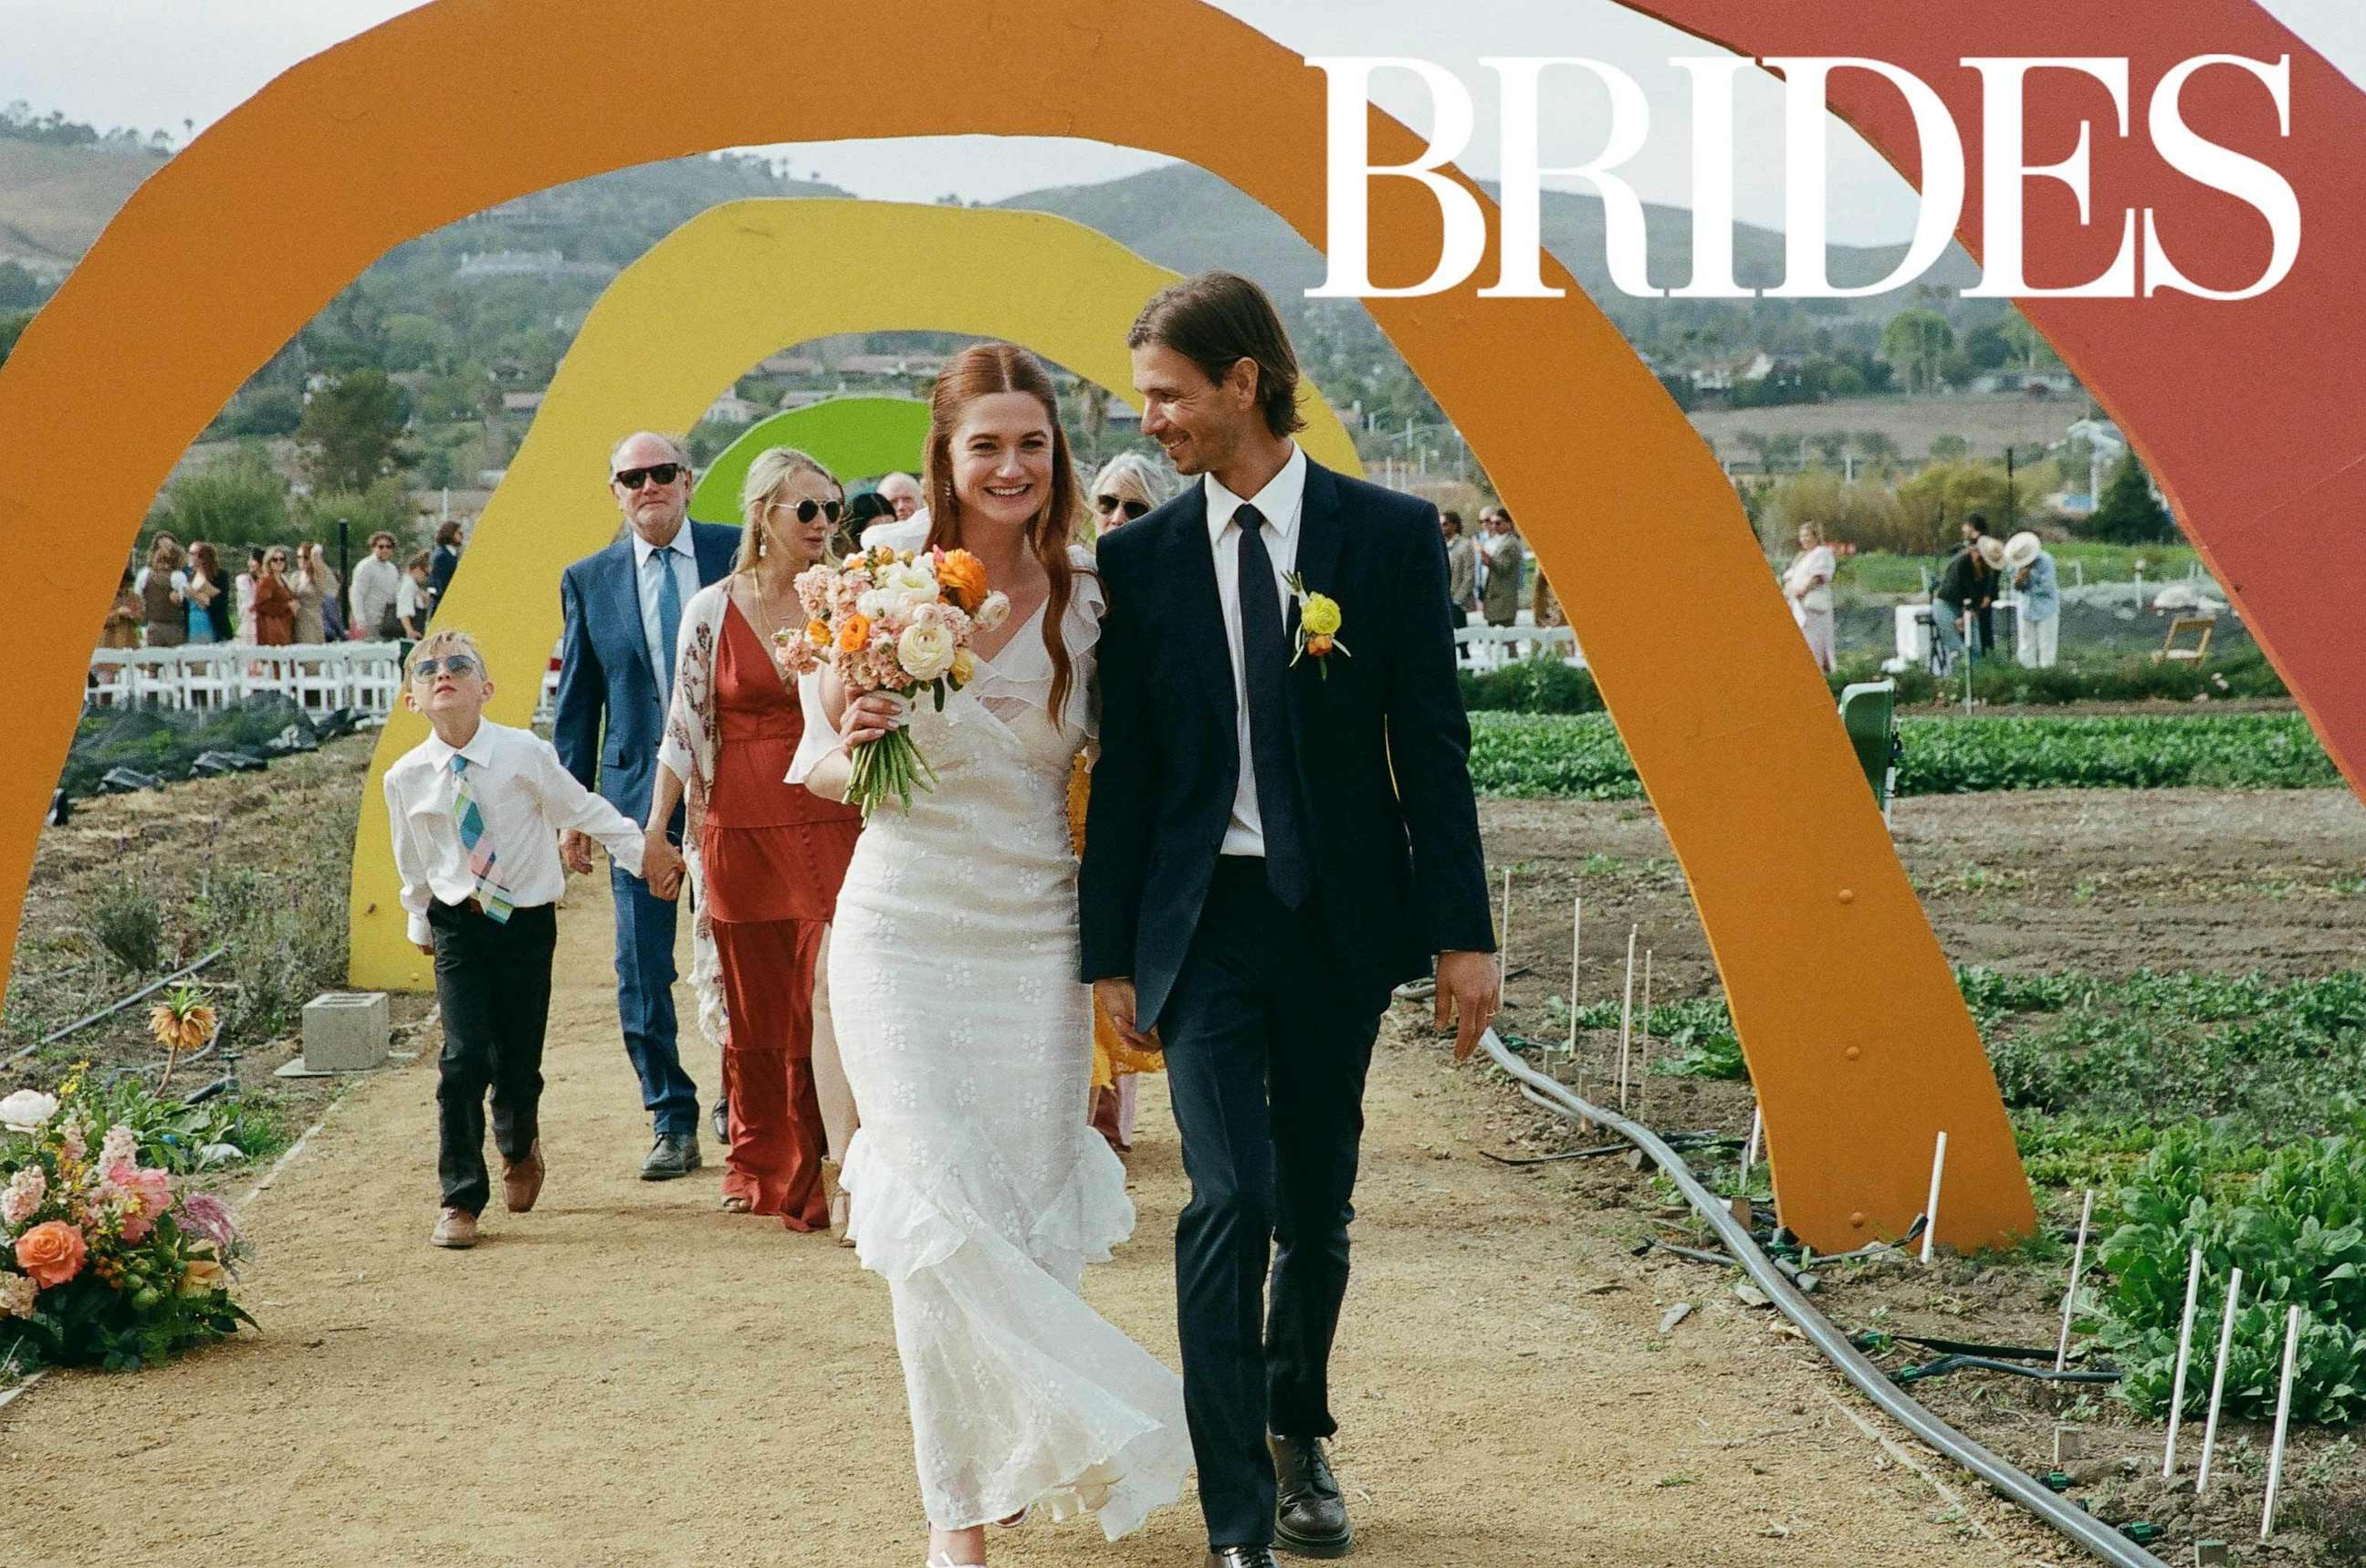 PHOTO: Bonnie Wright and Andrew Rococo tied the knot on March 19, 2022 at The Ecology Center in San Juan Capistrano.